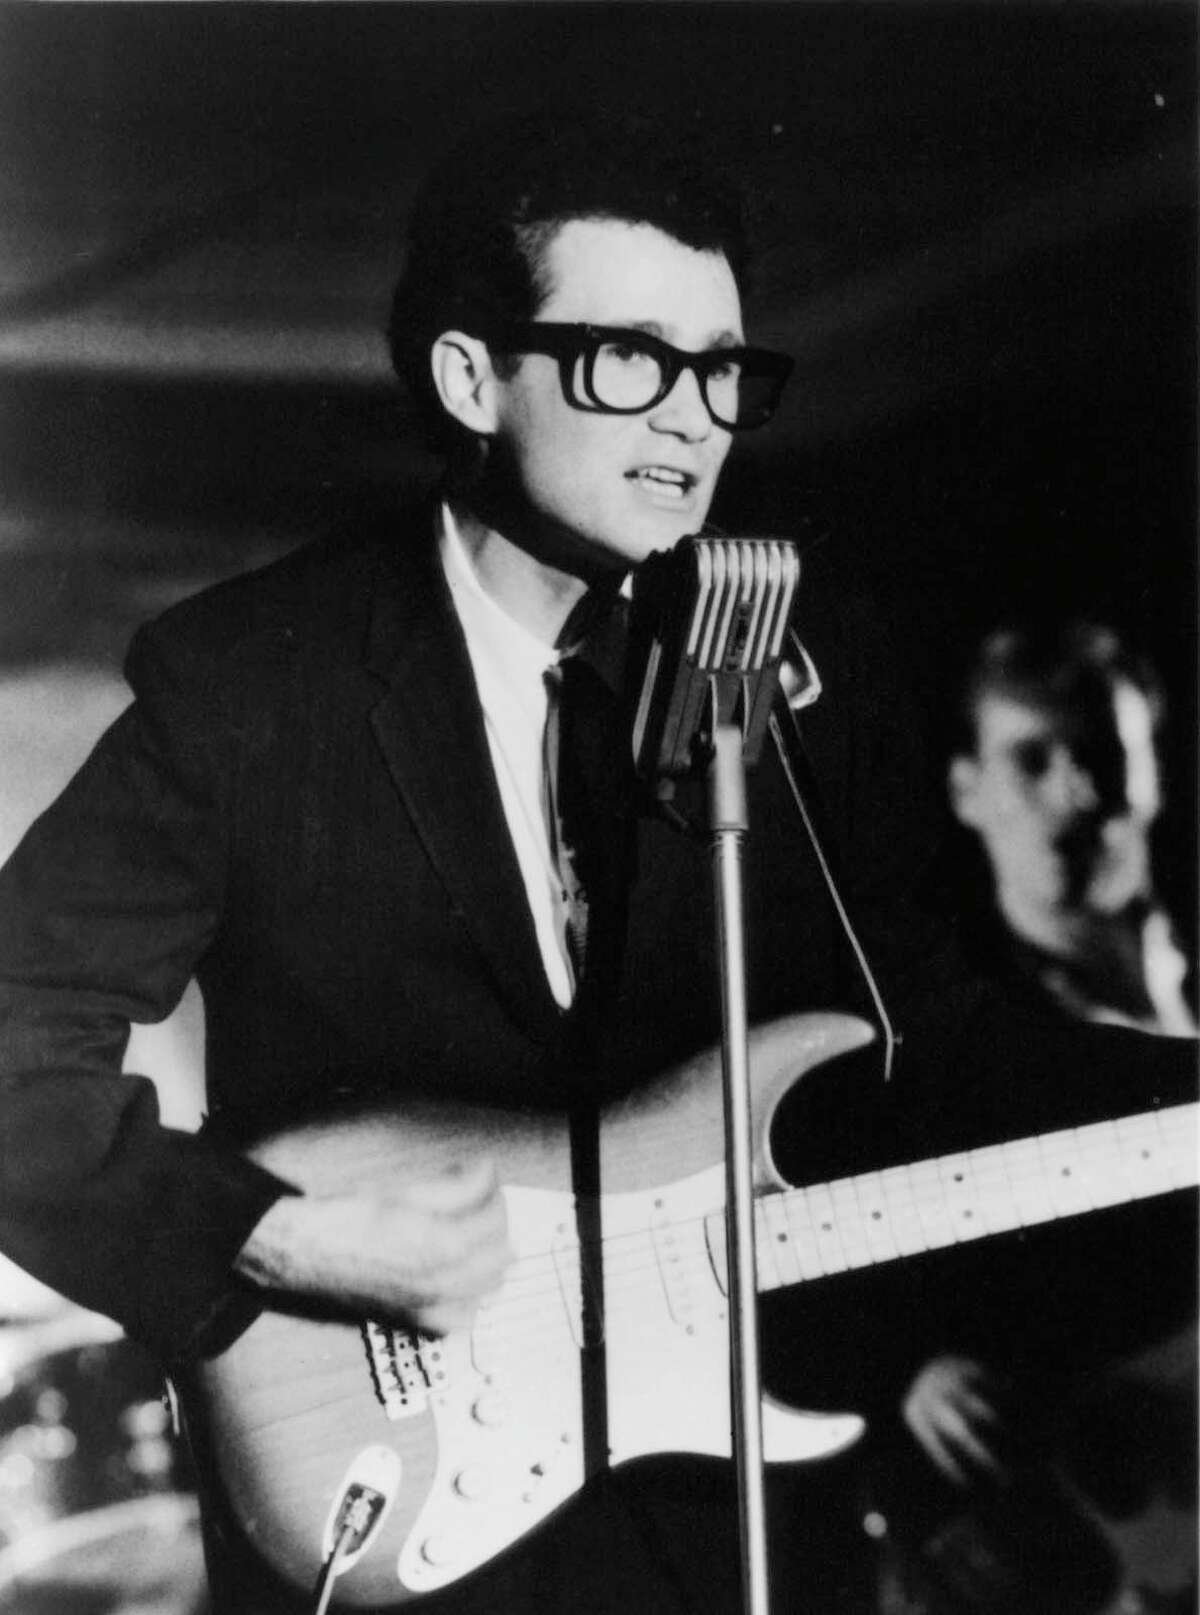 The Day The Music Died Remembering Buddy Holly The Big Bopper And